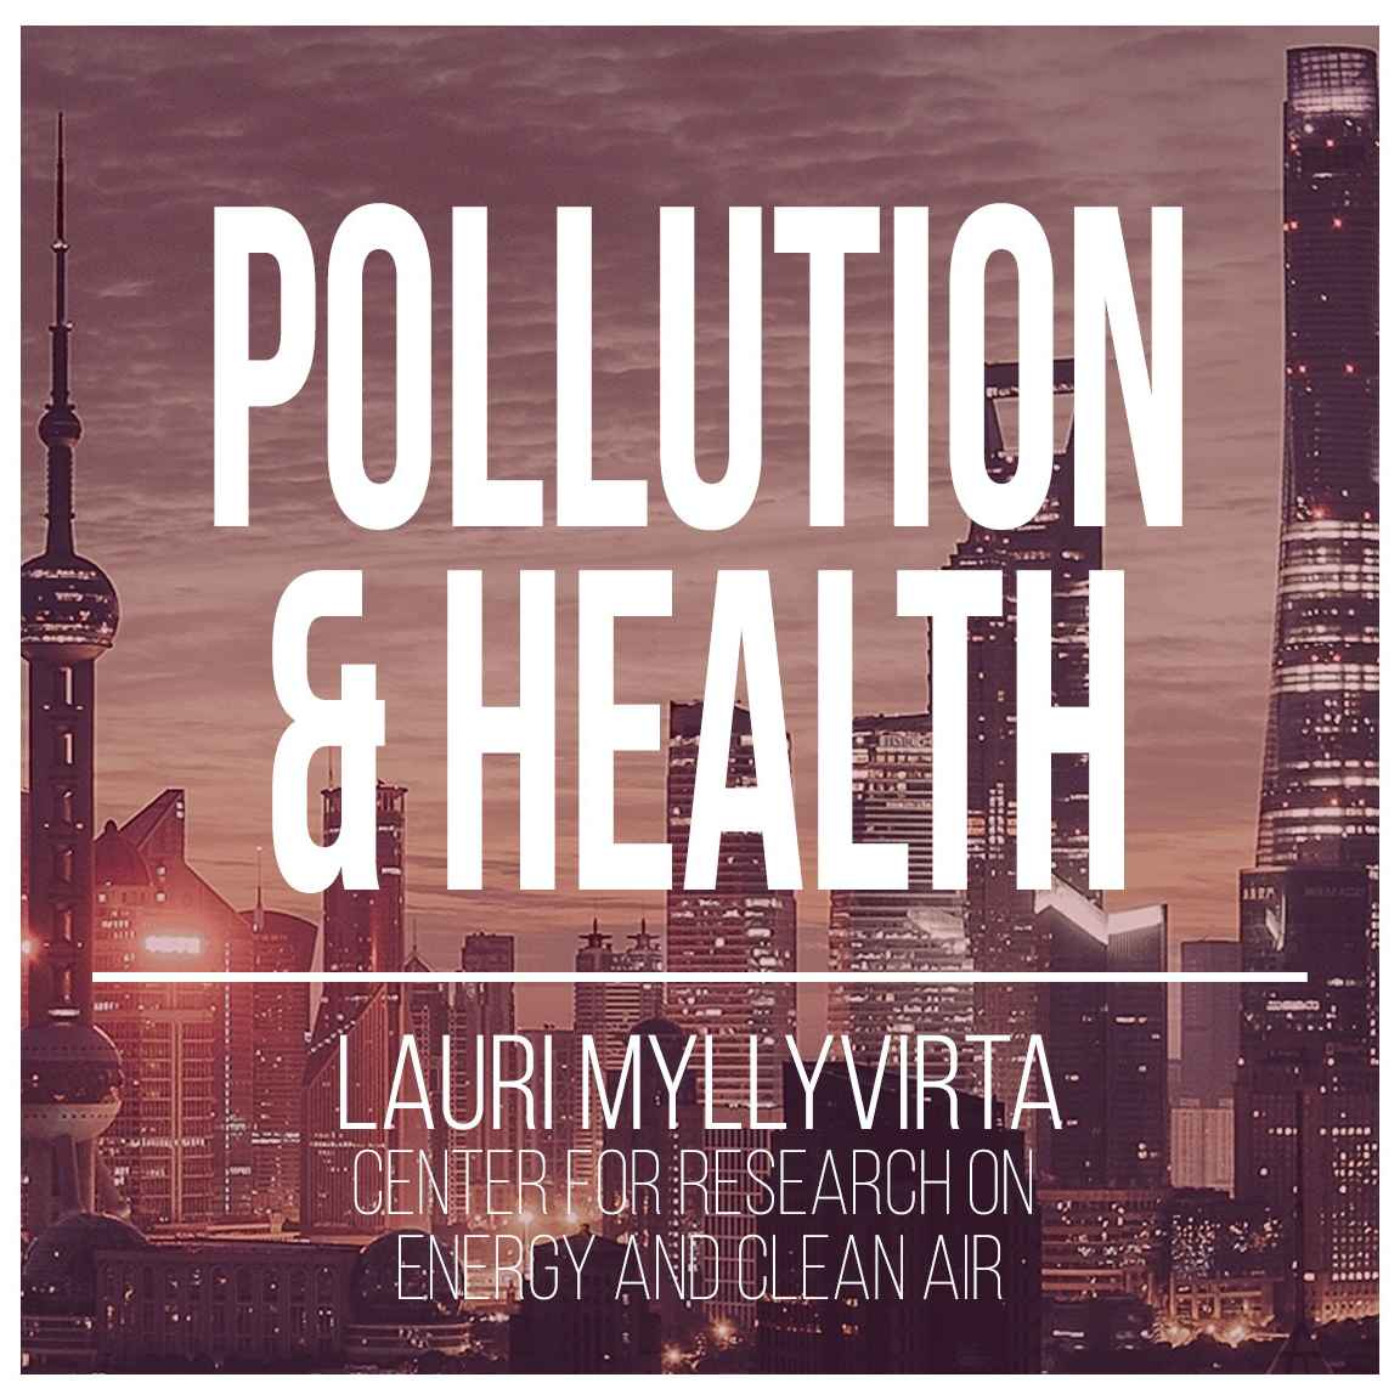 Clearing the Air: Air Quality Data & Solutions for Pollution